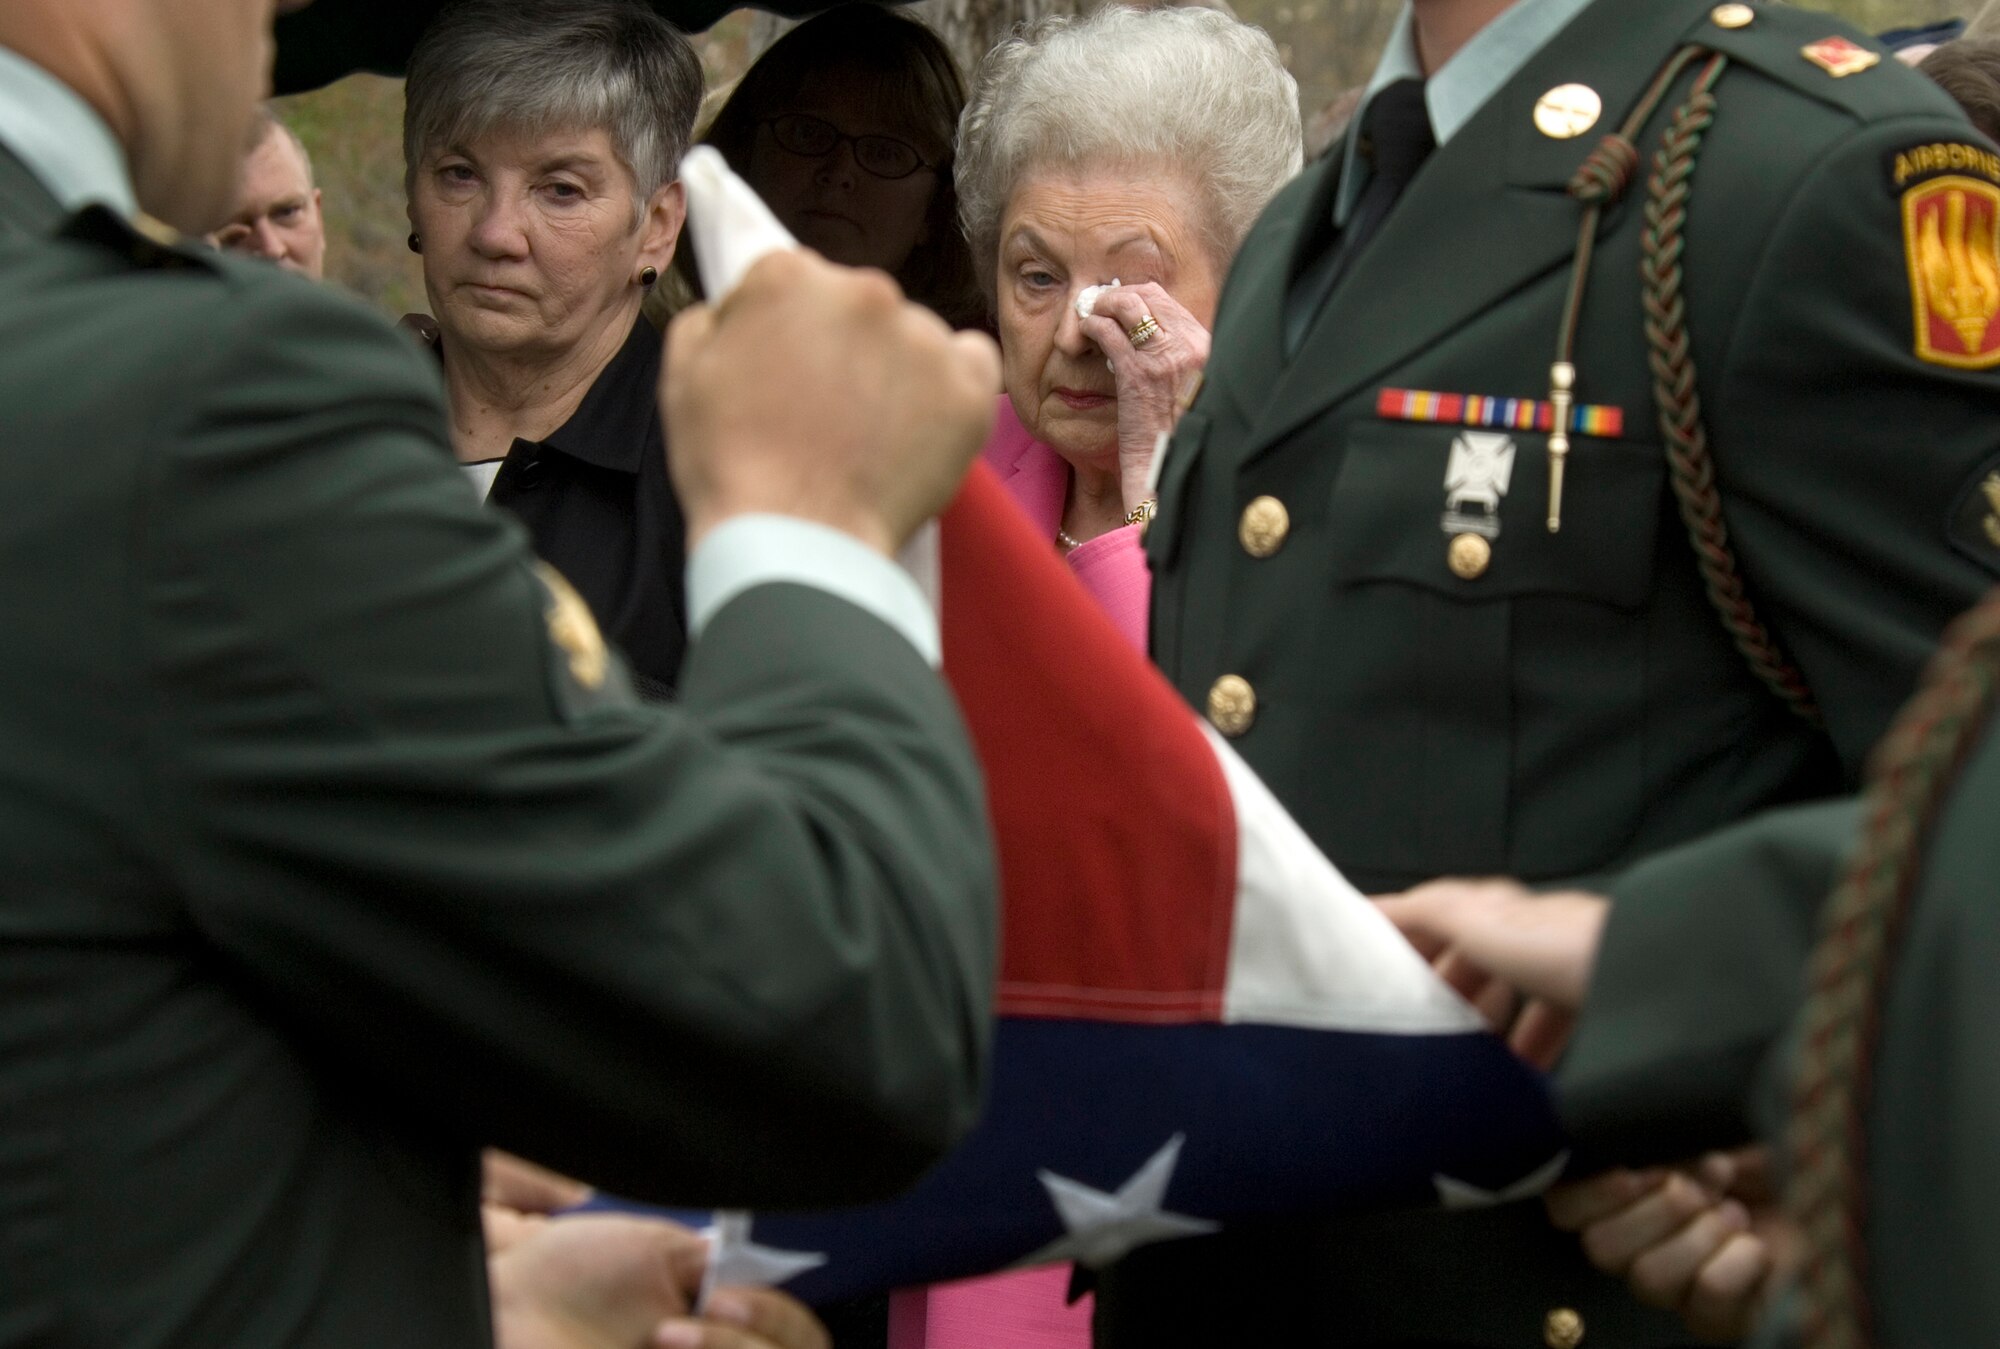 Joan Kitchen, niece, (left) and Lola Upchurch, sister-in-law, watch members of the 82nd Airborne at Fort Bragg, N.C., fold the flag Saturday, April 8, 2006, during a memorial service for 2nd Lt. Robert Hoyle Upchurch.  The lieutenant was a member of the famed Flying Tigers during World War II and was listed as missing in action until his remains were identified last May by the Joint POW/MIA Accounting Command.  (U.S. Air Force photo/Master Sgt. Jack Braden)